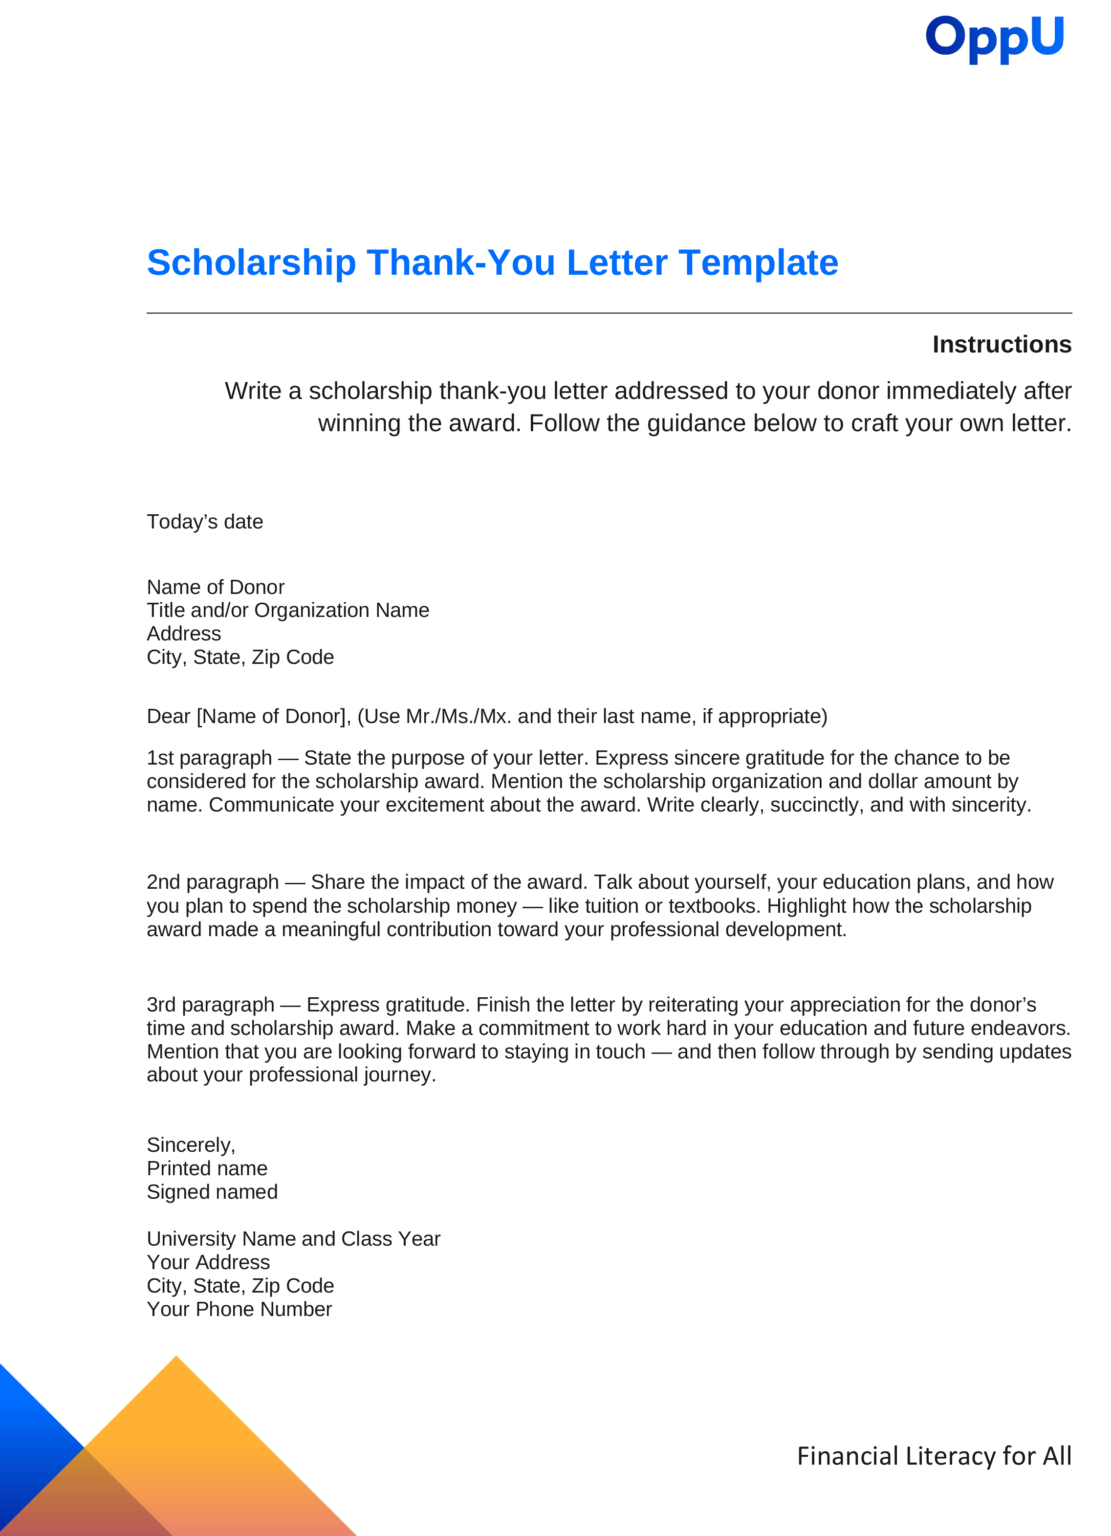 how-to-write-a-scholarship-thank-you-letter-oppu